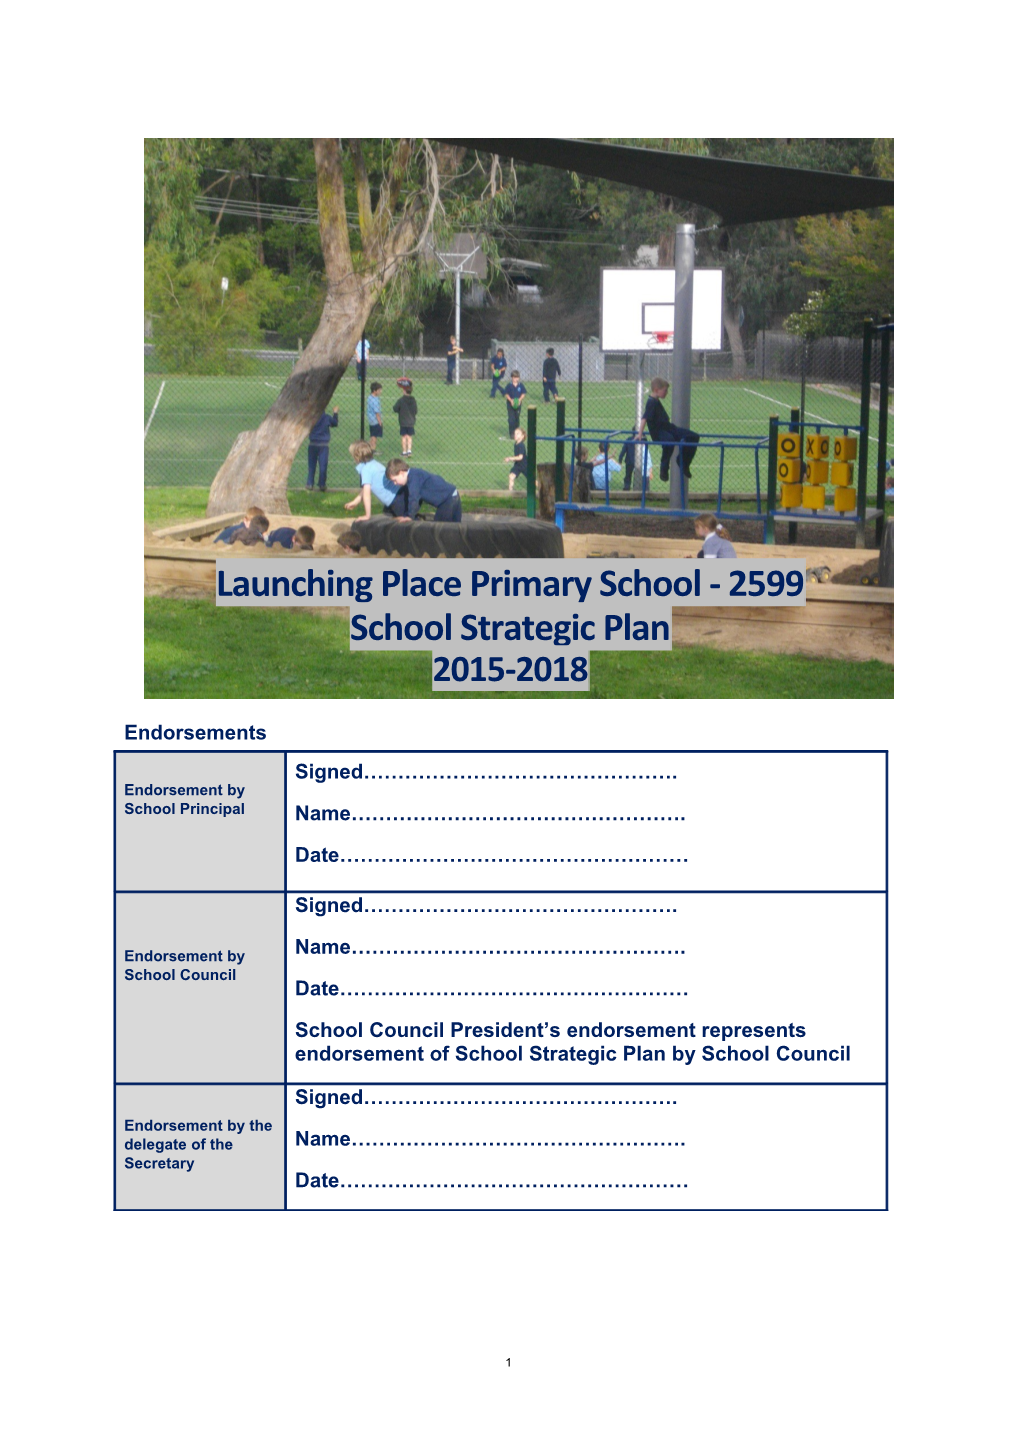 Launching Place Primary School - 2599